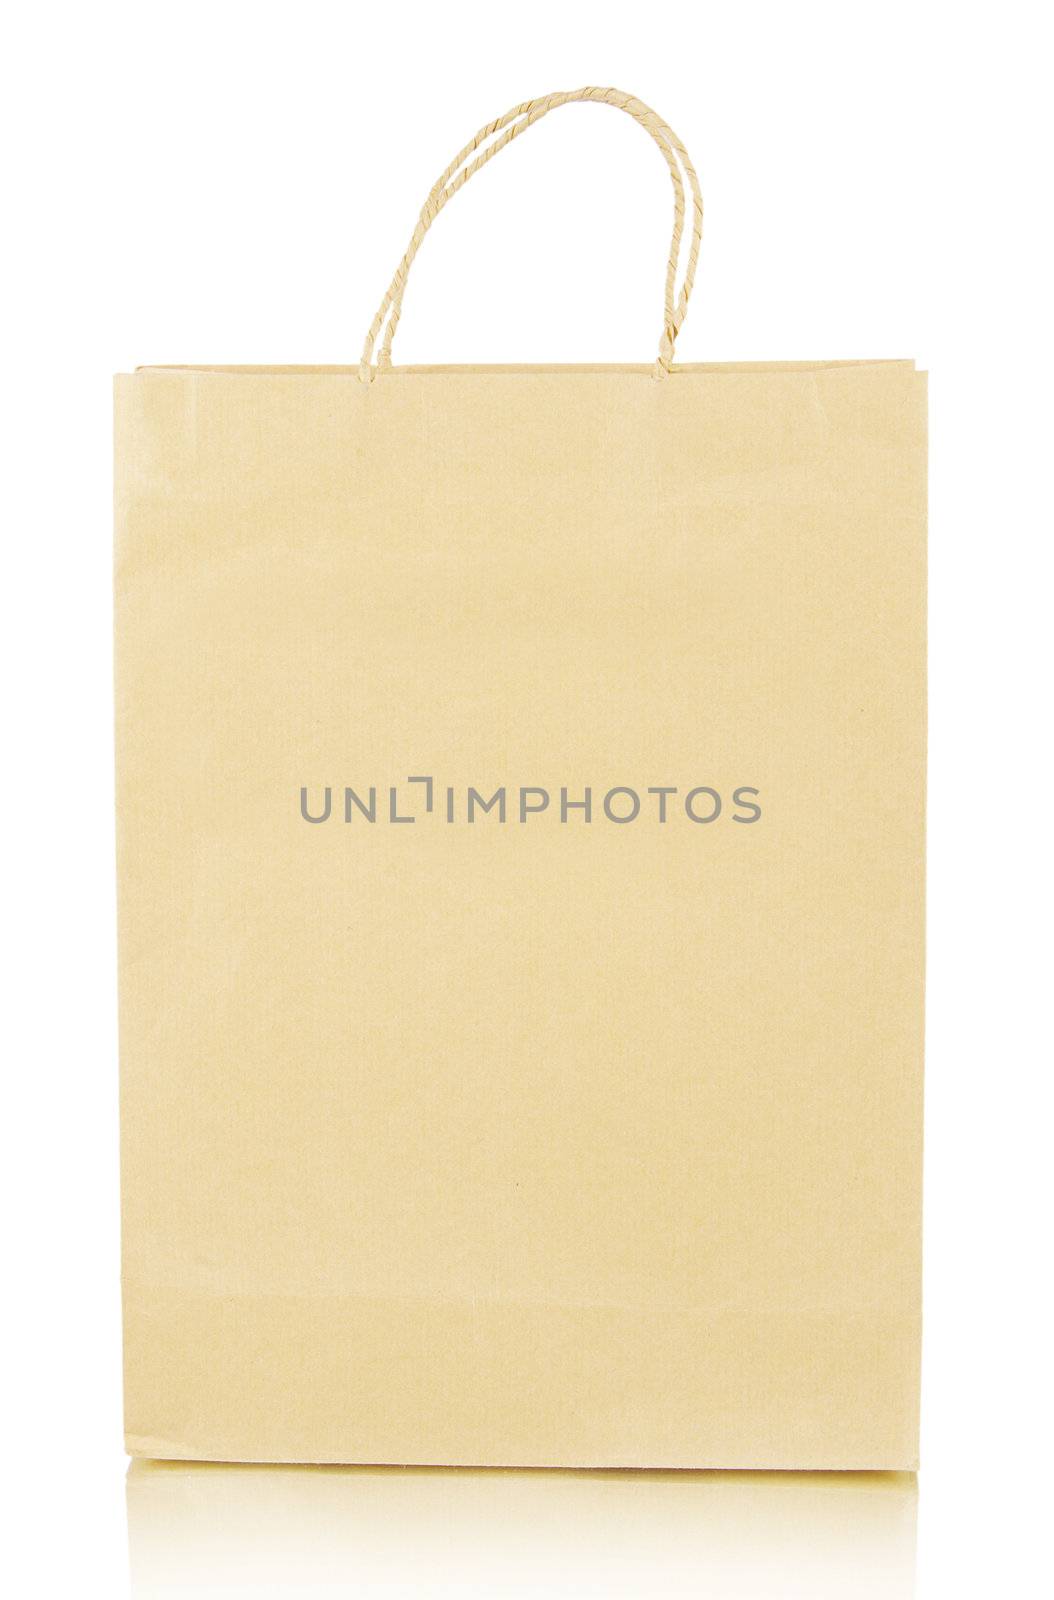 color shopping bag isolated on white background